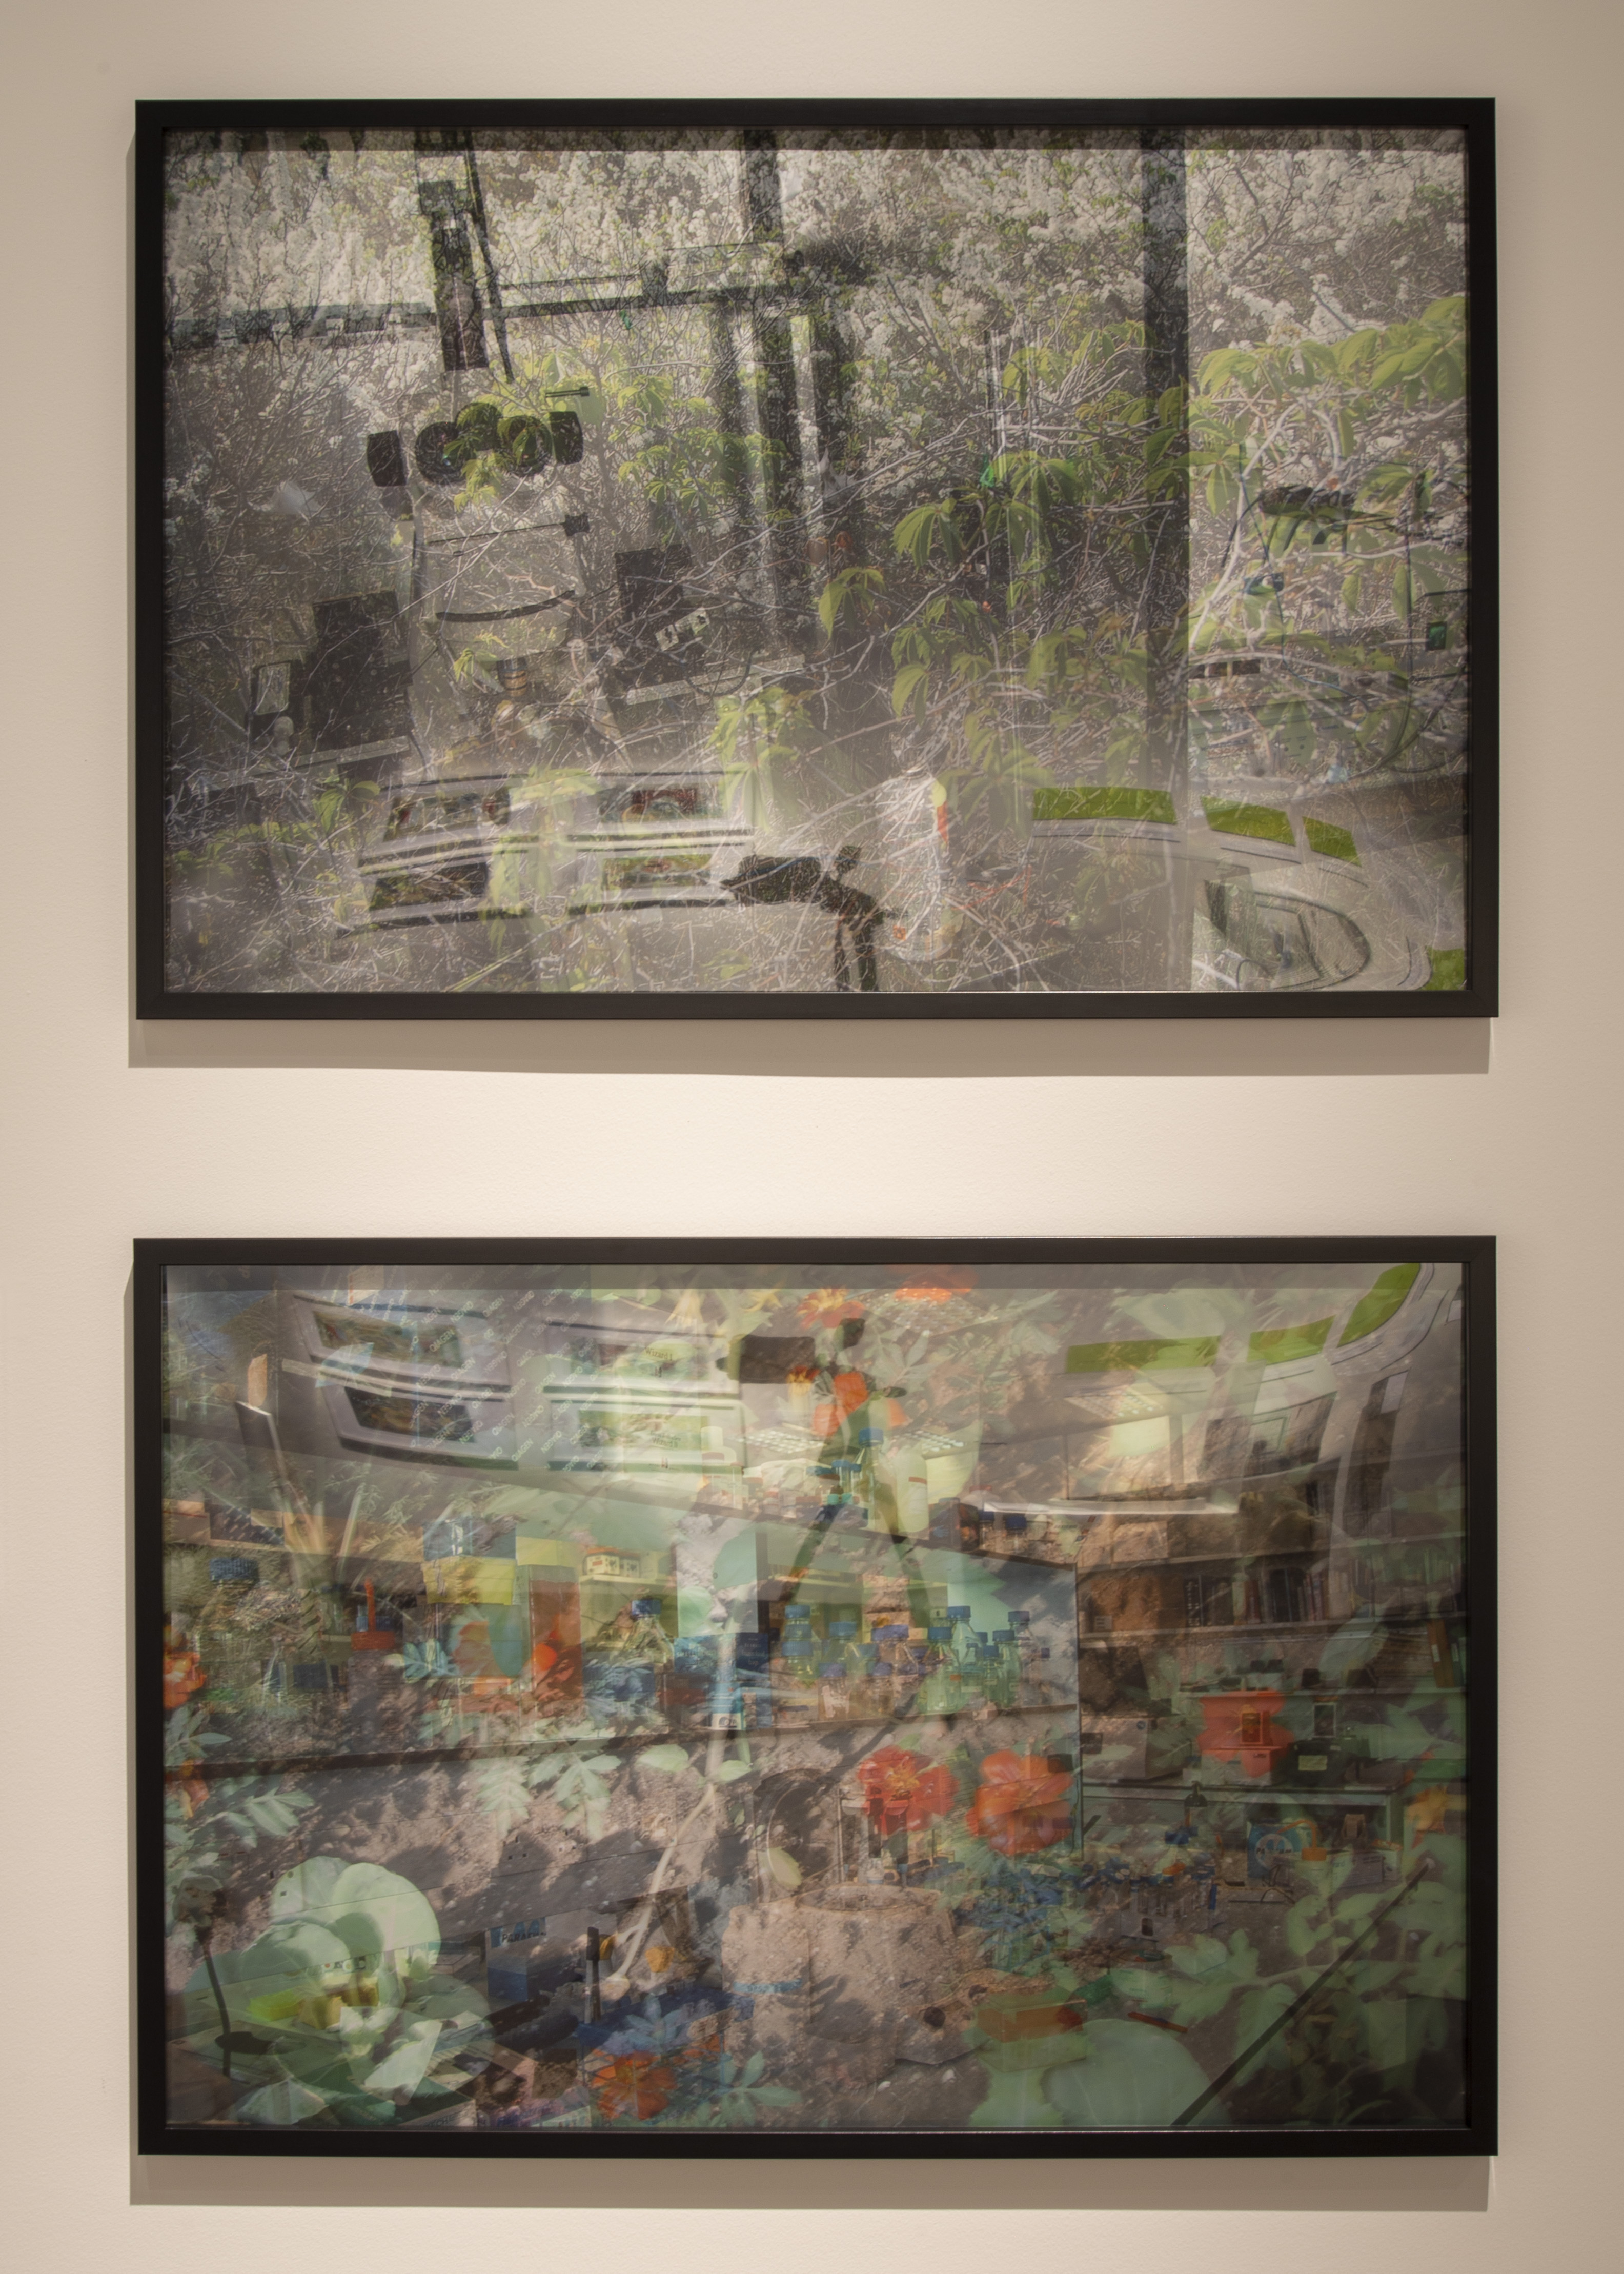 Suzanne Anker’s series Laboratory Life (for Oryx and Crake): Vanishing Point (2006) Snowman (2007). 24 x 36 digital prints, Image by Matthew Gay, courtesy of the Gregg Museum of Art & Design